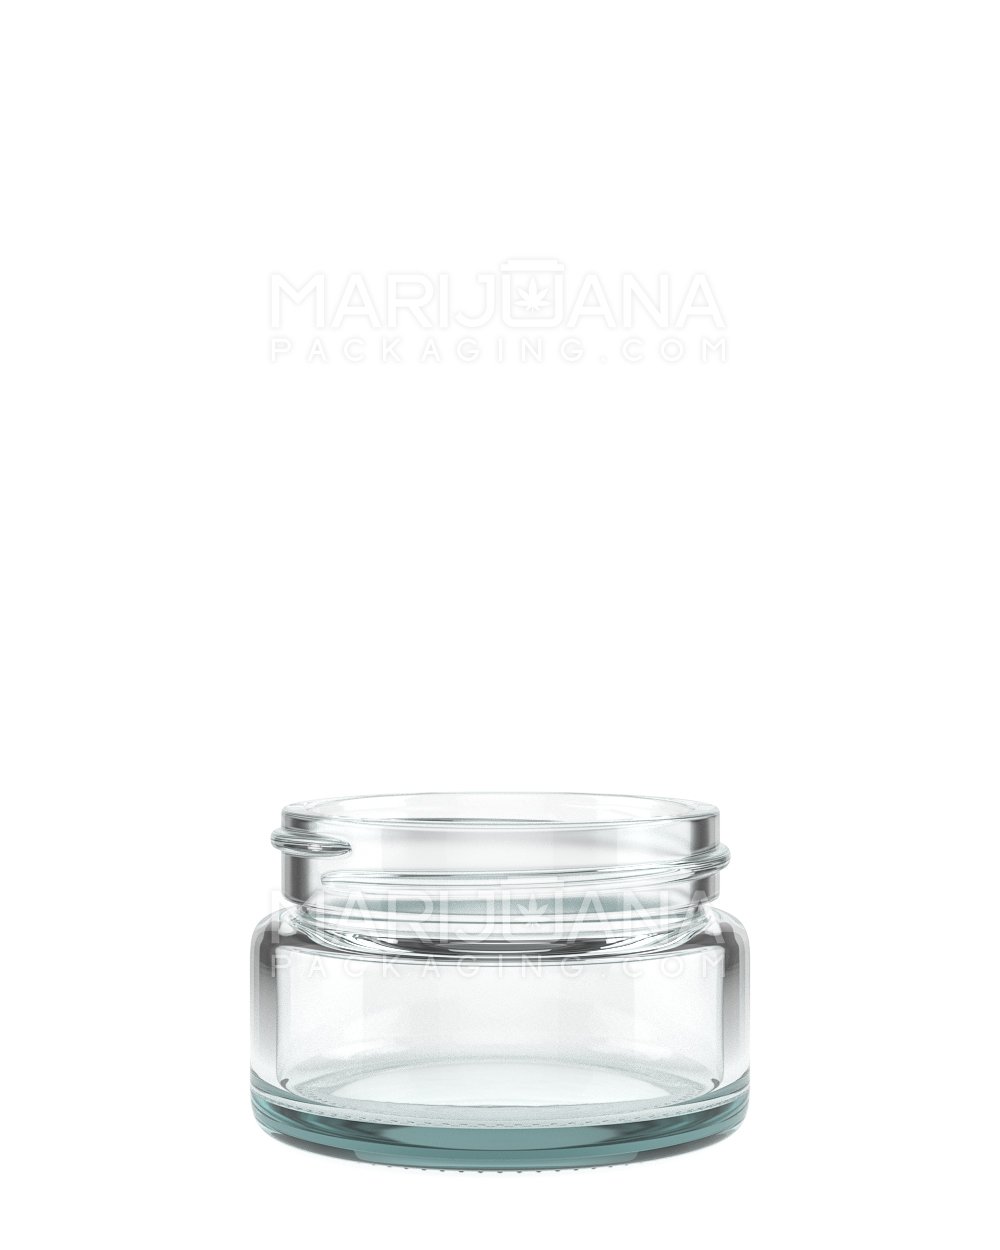 Straight Sided Clear Glass Jars | 50mm - 1oz - 200 Count - 1